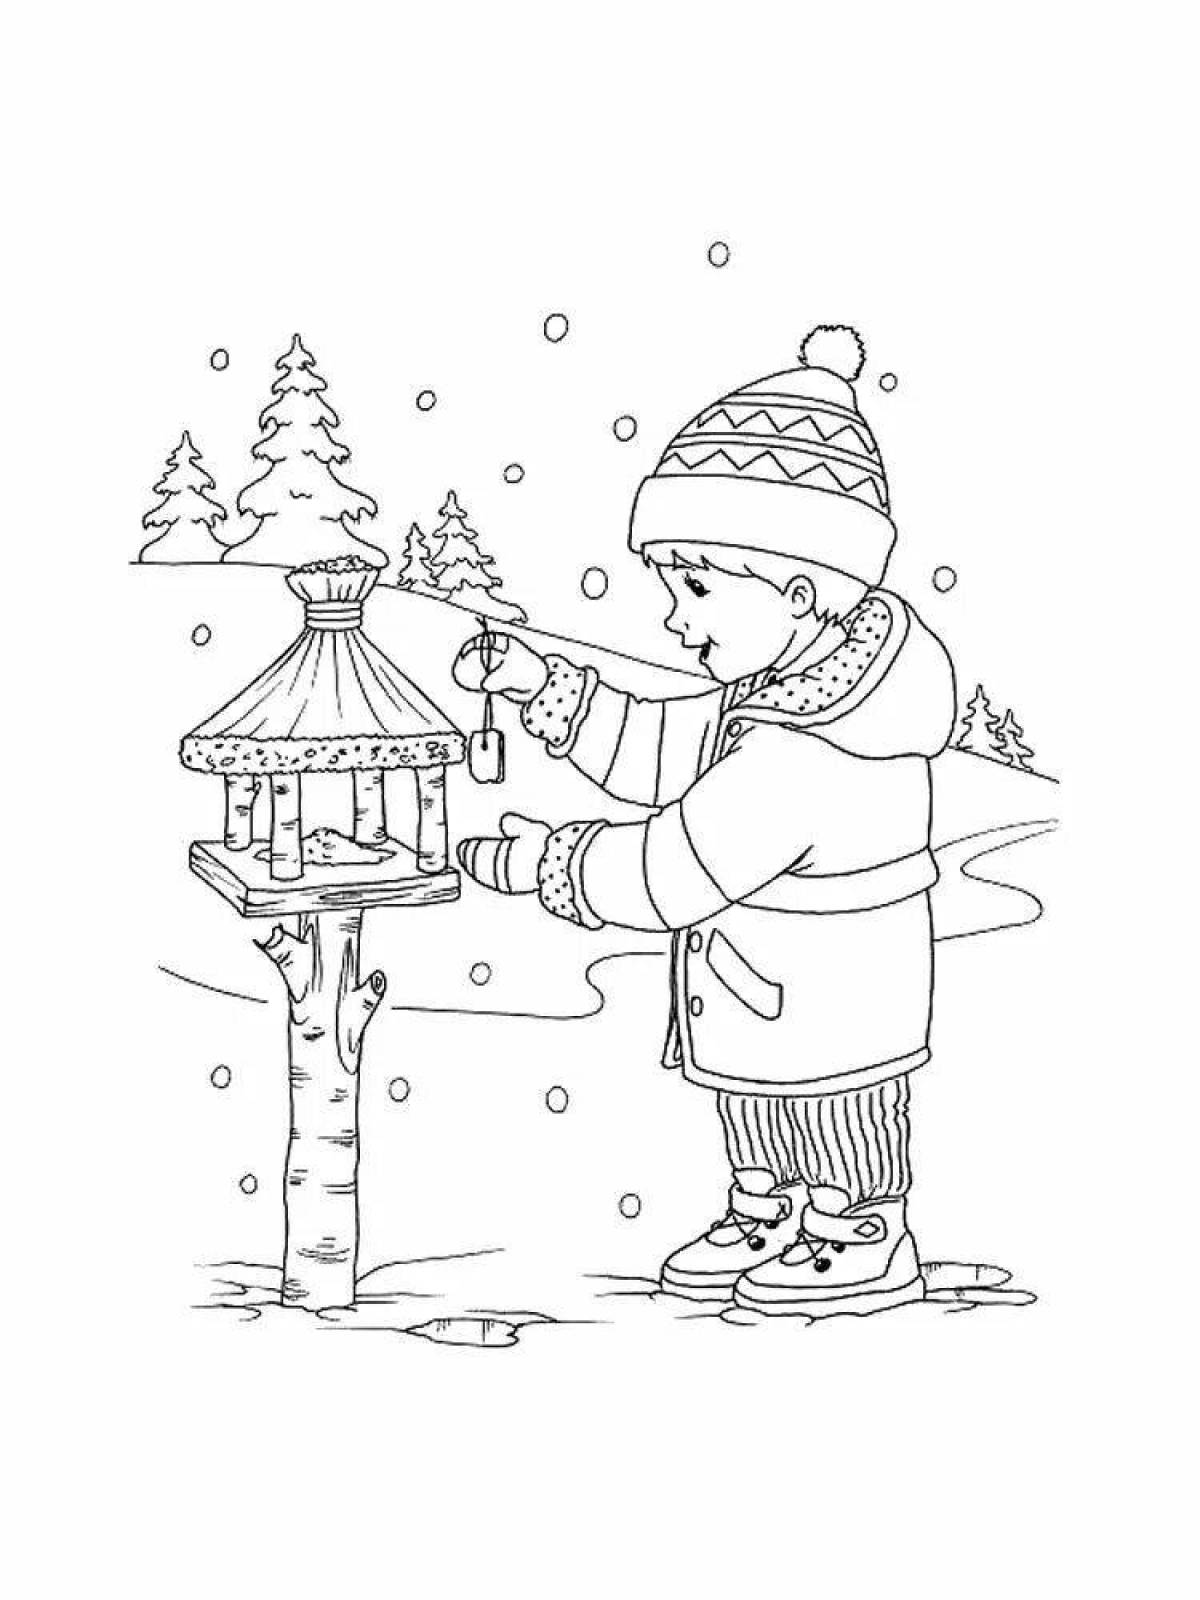 Great bird feeder coloring book for kids in winter